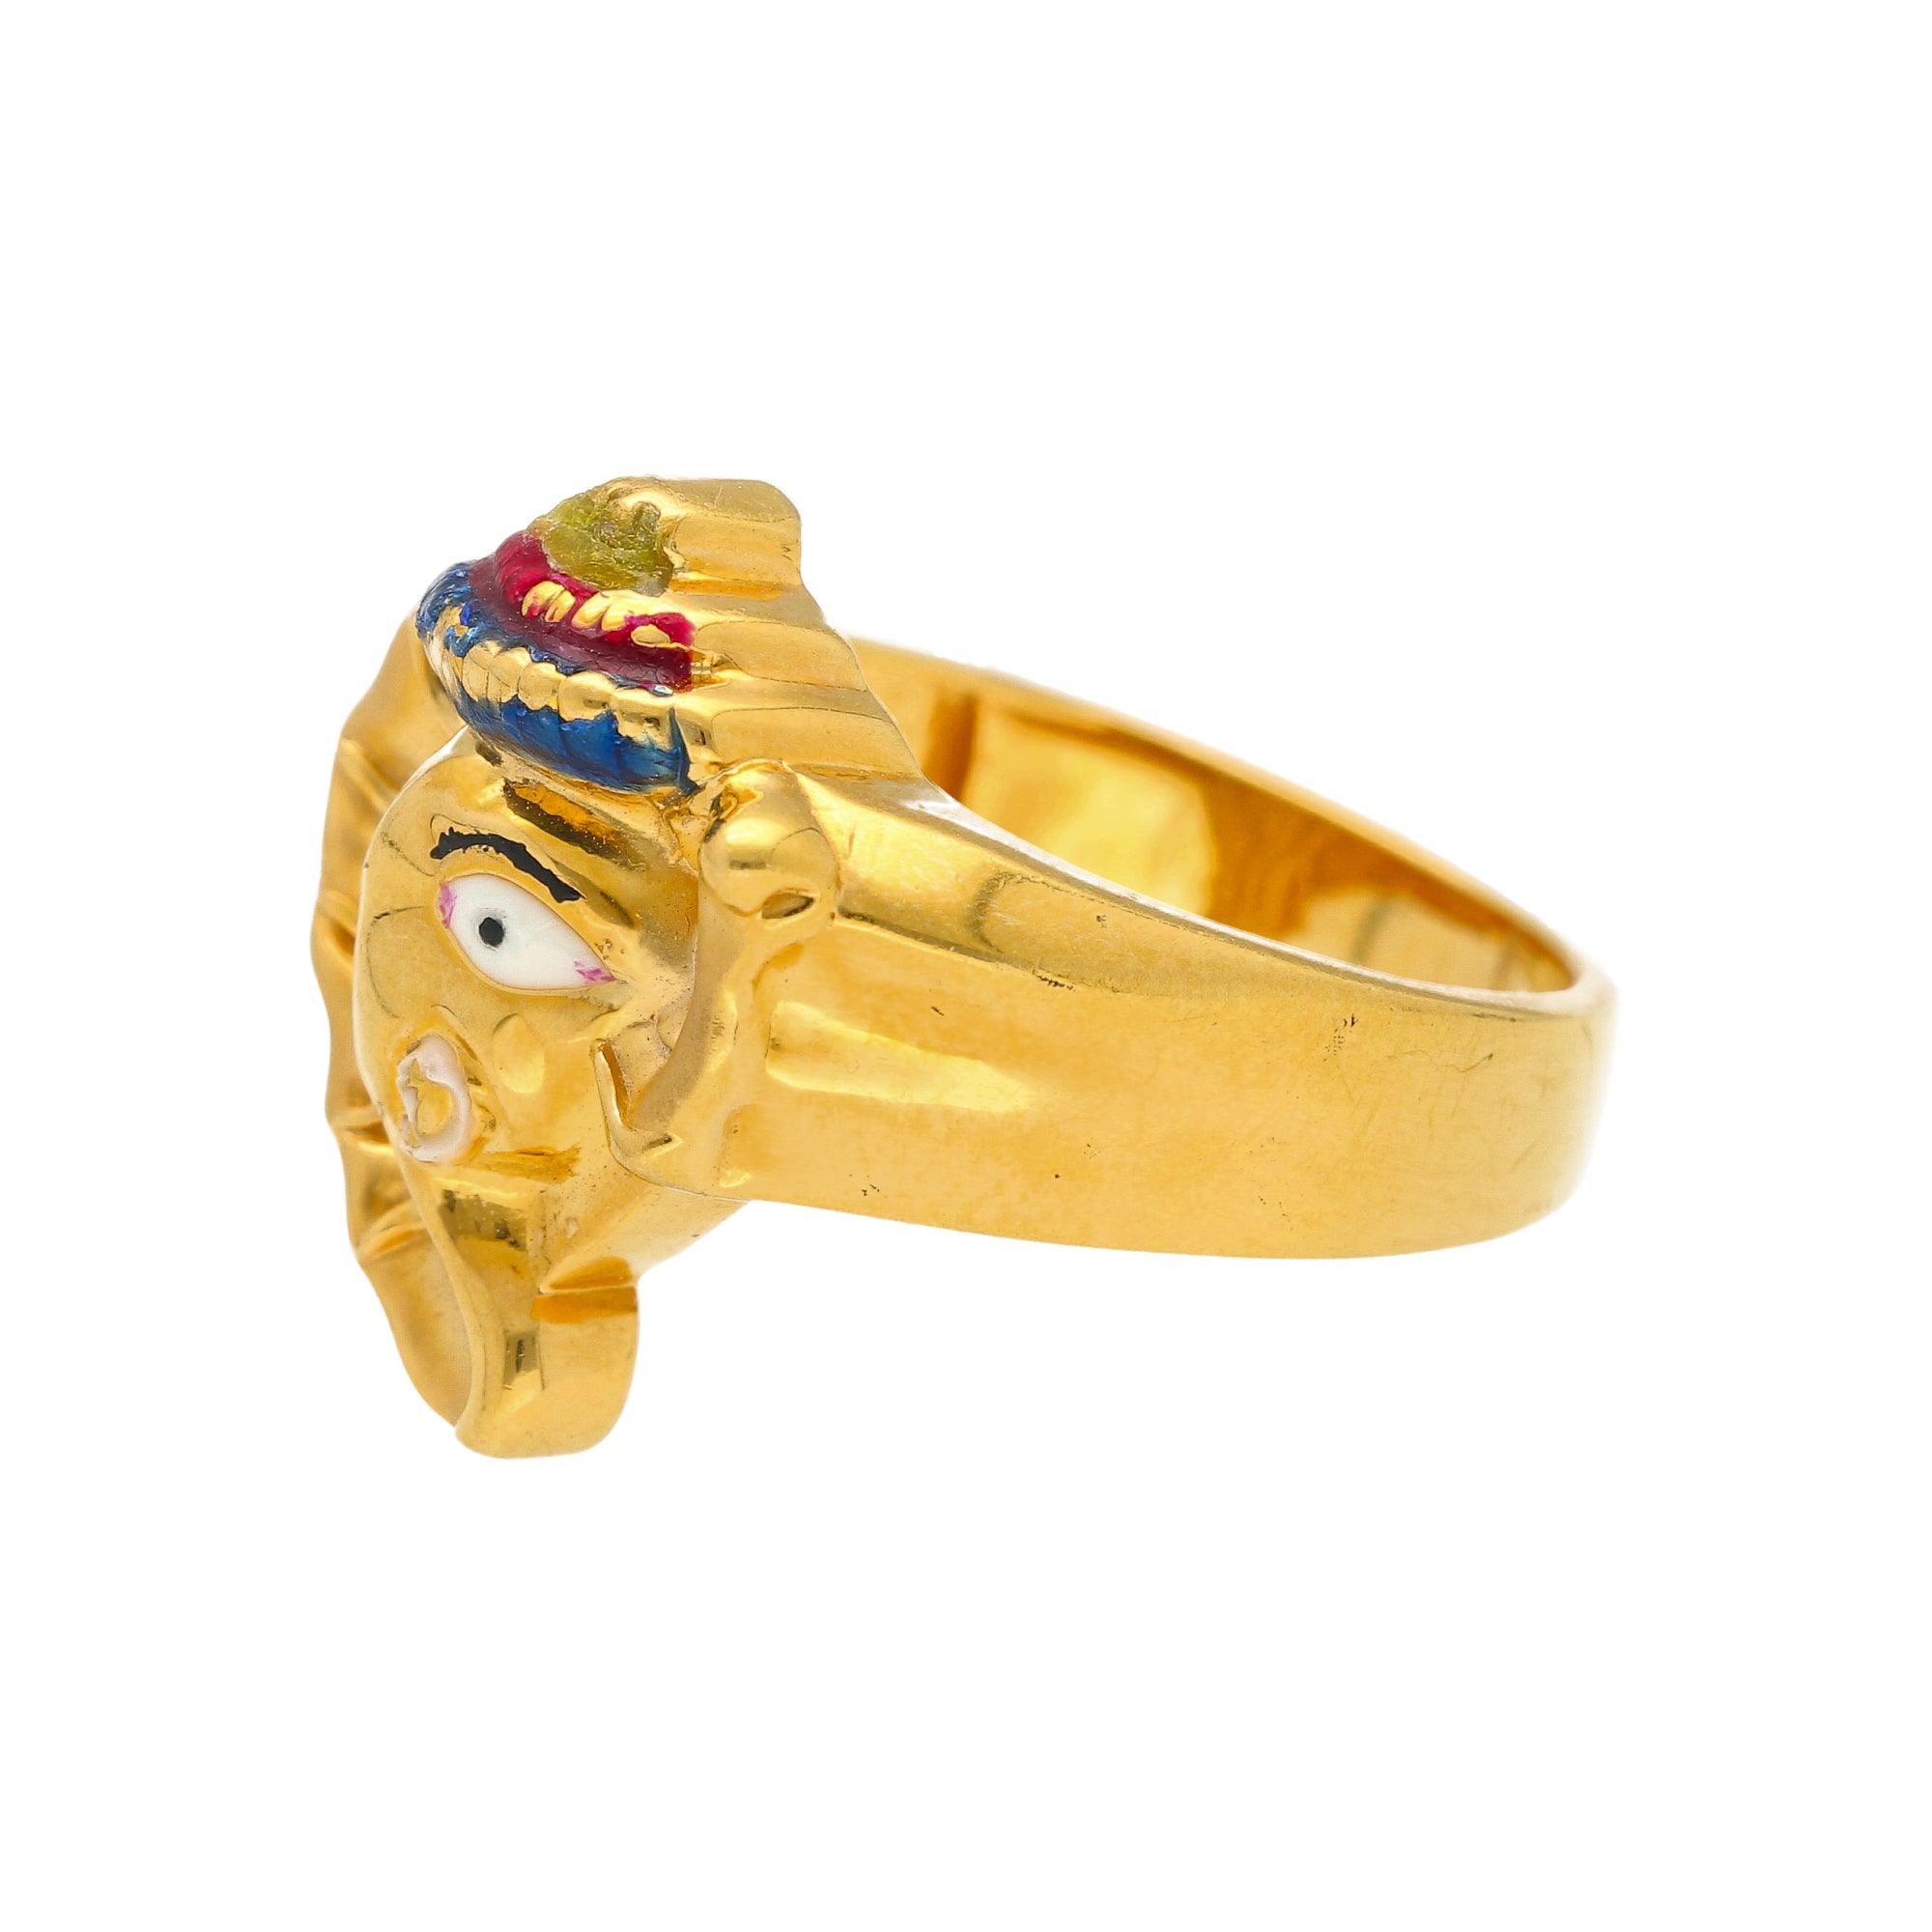 74% OFF on Rich & Famous New ClassicCollection Shirdi Sai Baba in Shiny  Design Brass Gold Plated Ring on Flipkart | PaisaWapas.com